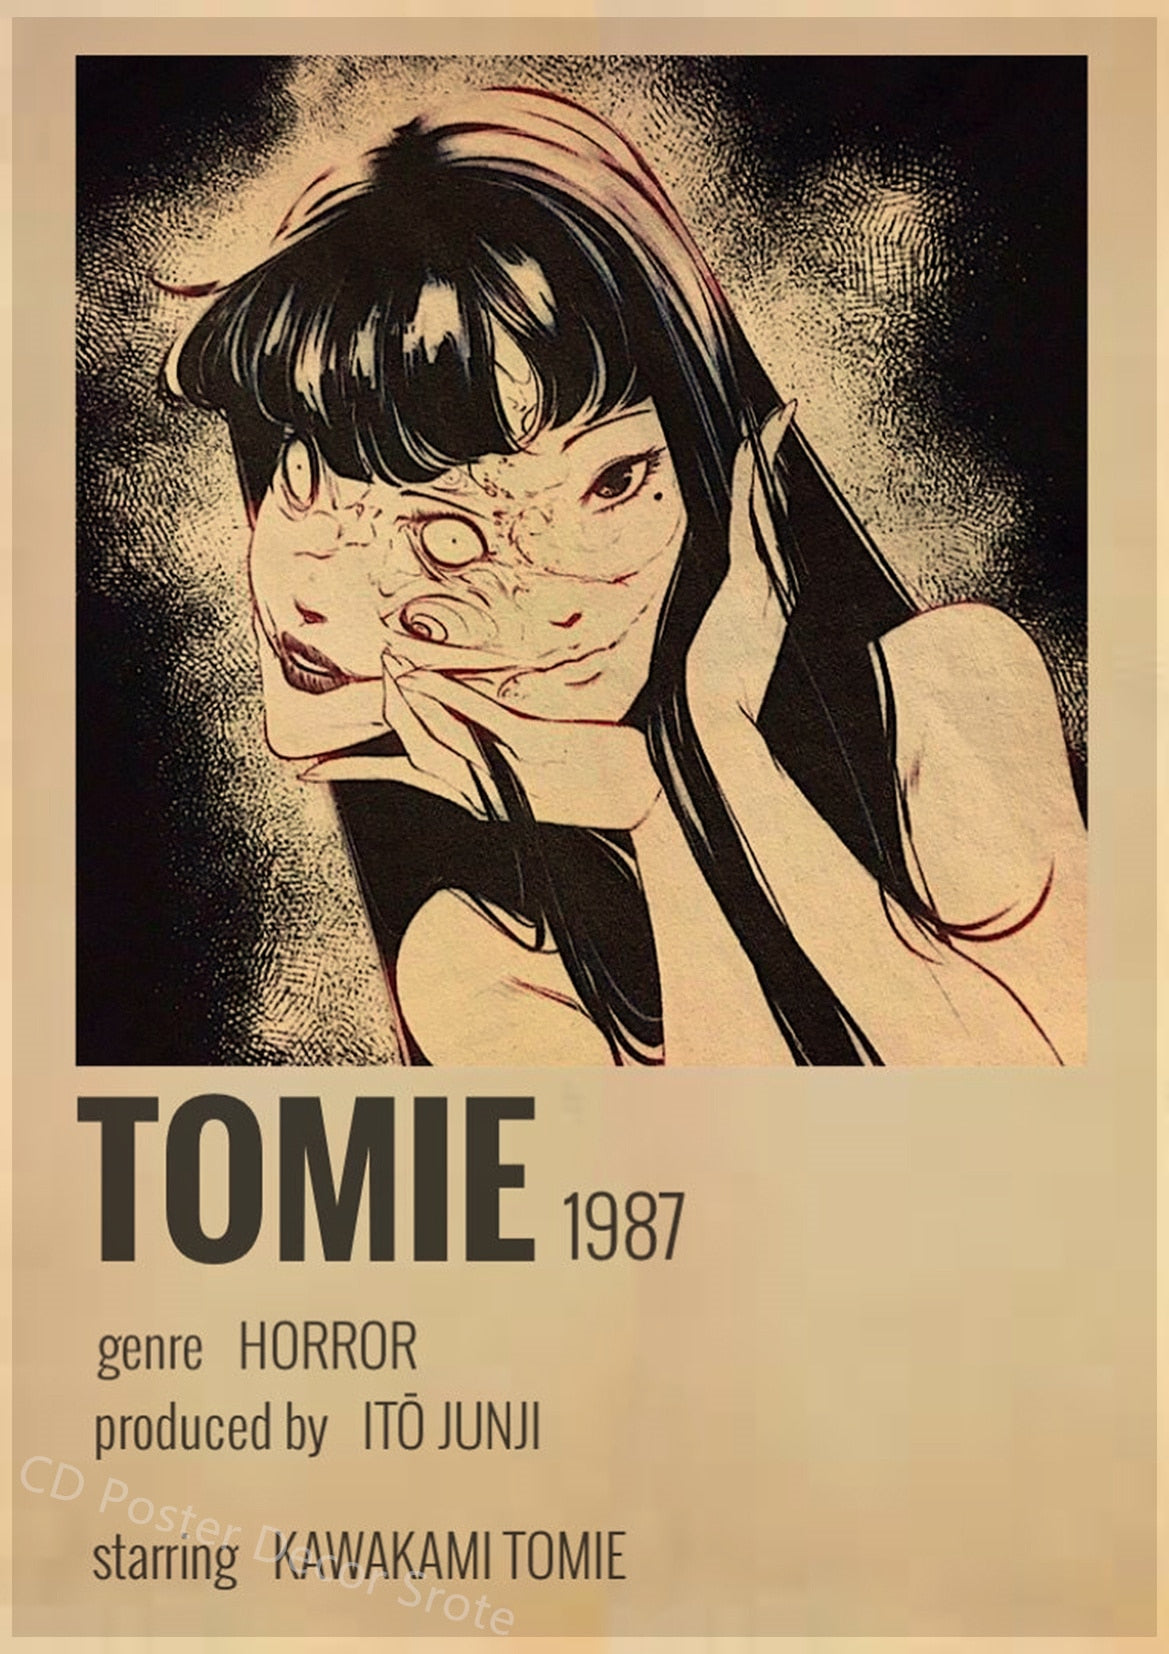 Classic Anime Junji Ito Retro Poster Kraft Paper Tomie Posters DIY Vintage Home Room Bar Cafe Decor Aesthetic Art Wall Painting